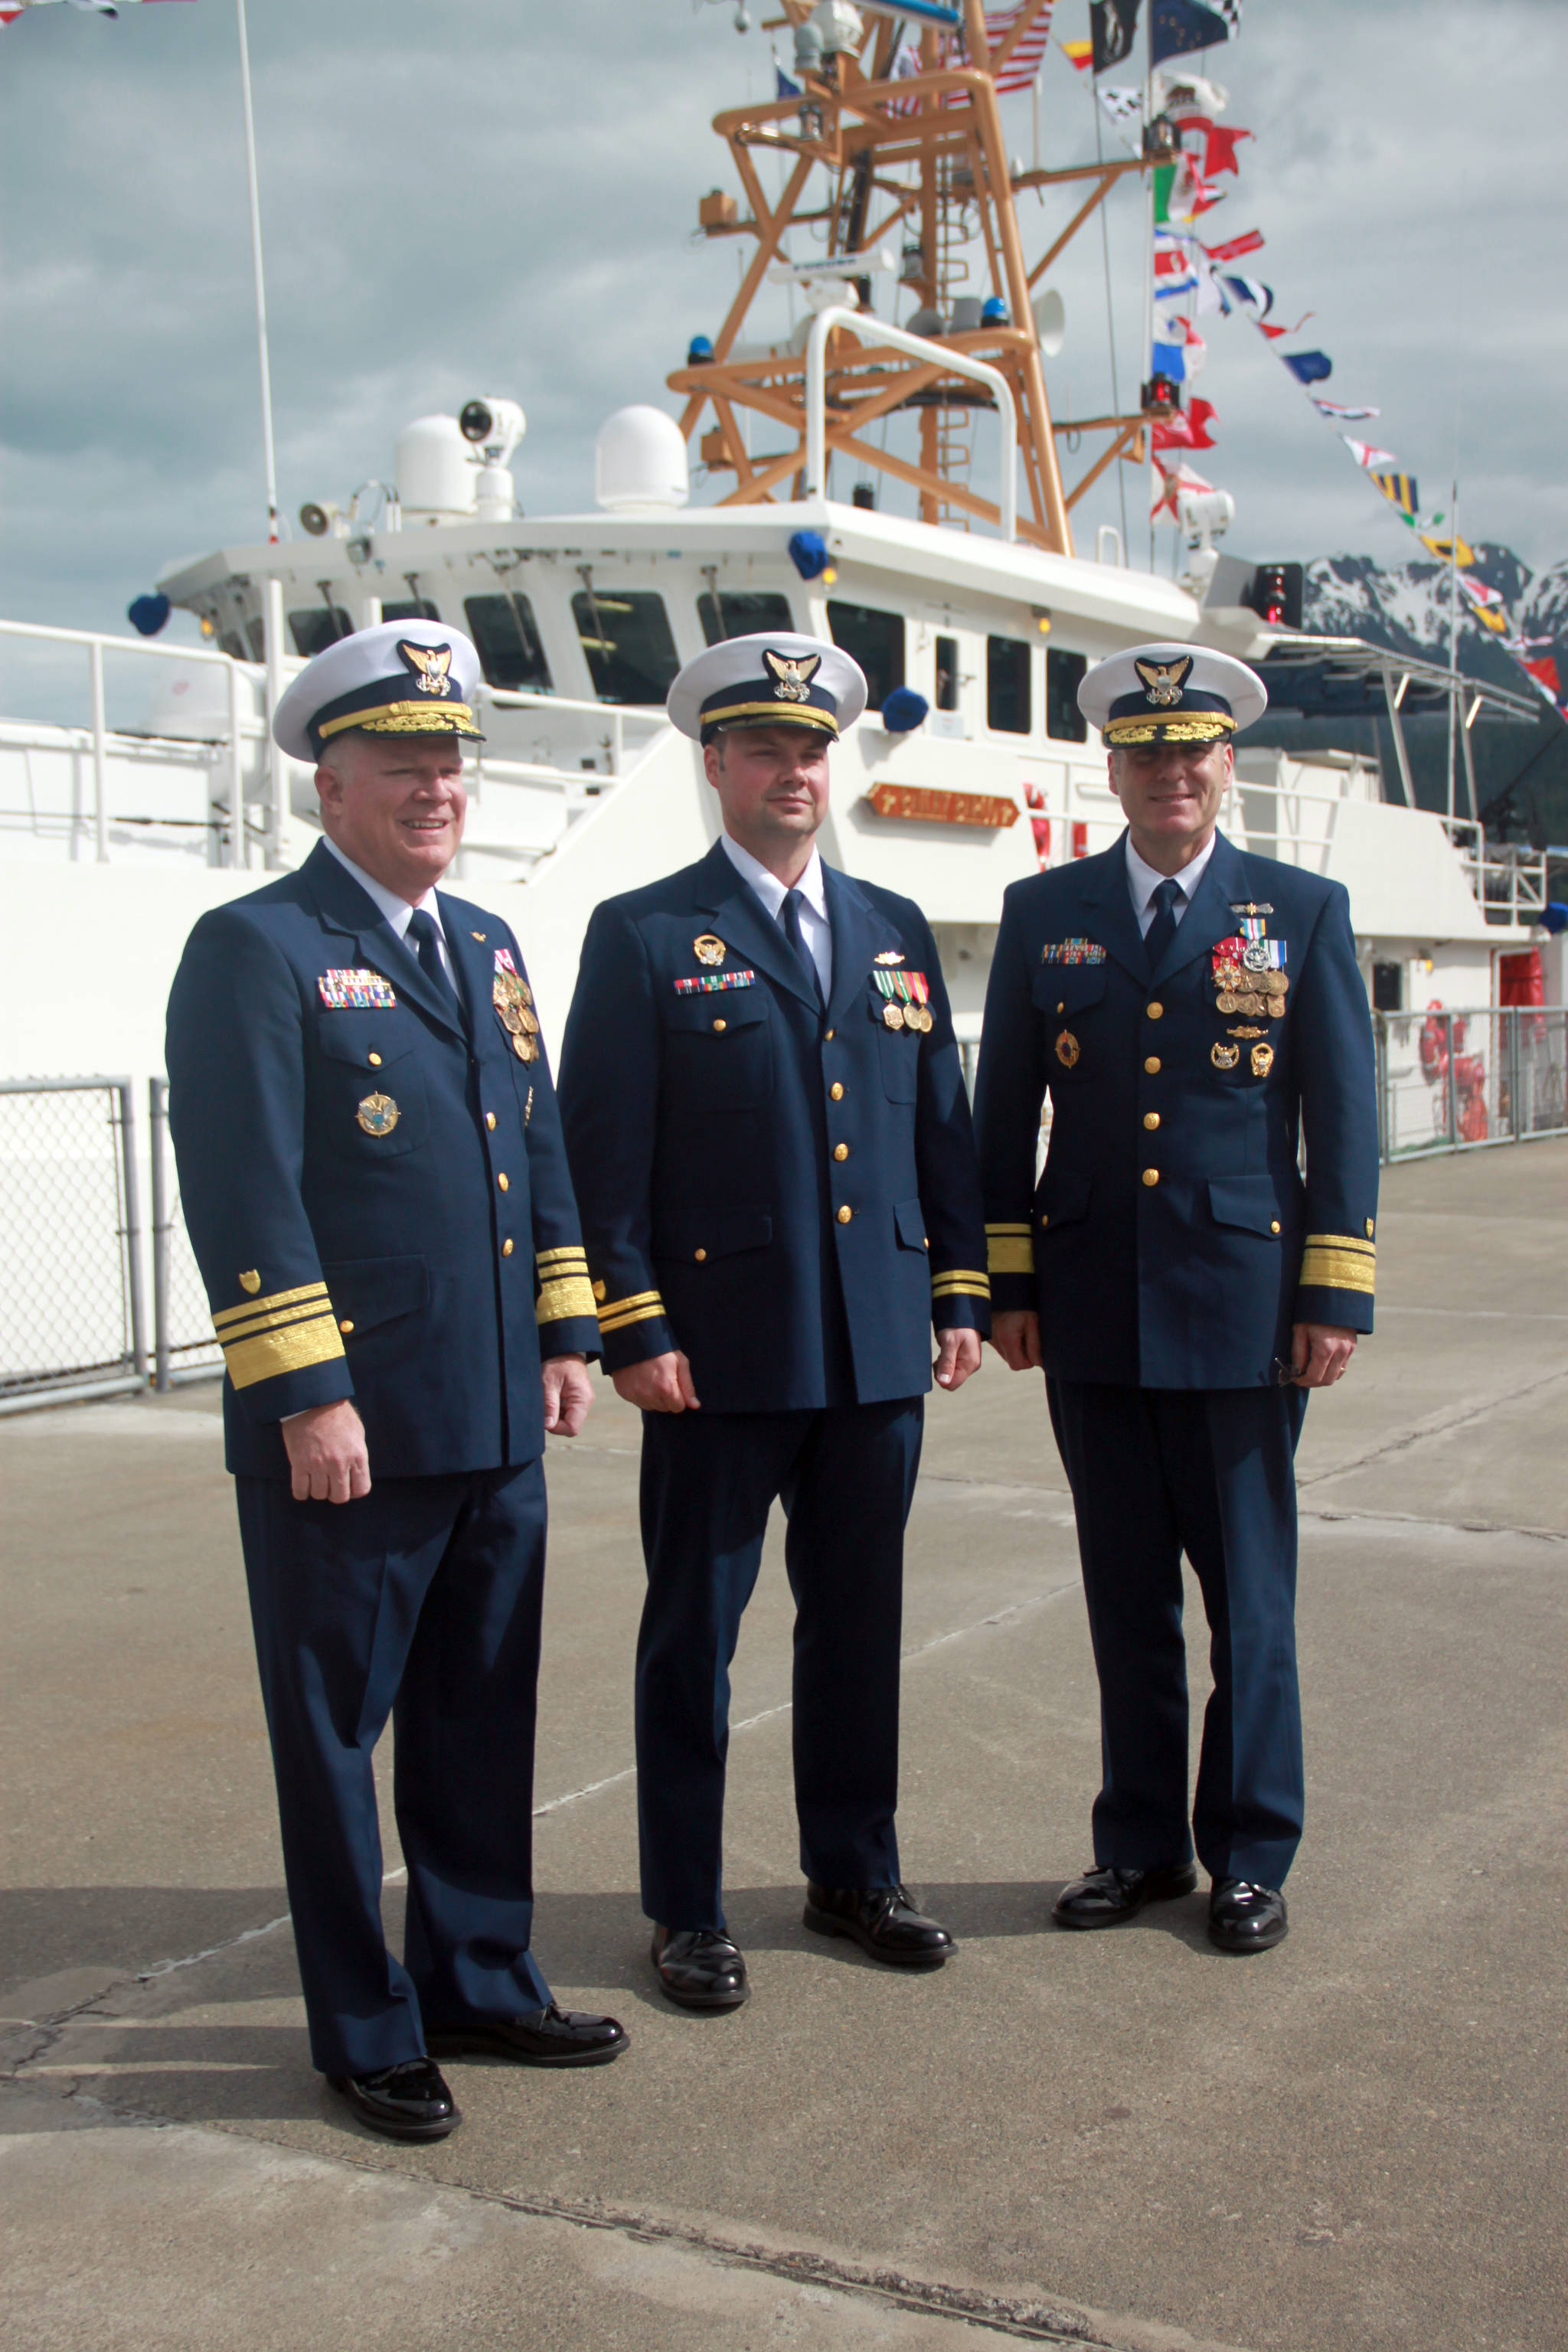 (From left to right) Vice Admiral Fred Midgette, commander of the Coast Guard pacific area, Lieutenant Frank Reed, commanding officer of the USCGC Bailey Barco, and Rear Admiral Michael McAllister, commander of the 17th coast guard district, stand in front of the newly commissioned coast guard cutter, Bailey Barco, following the commissioning ceremony Wednesday afternoon. (Erin Granger | Juneau Empire)